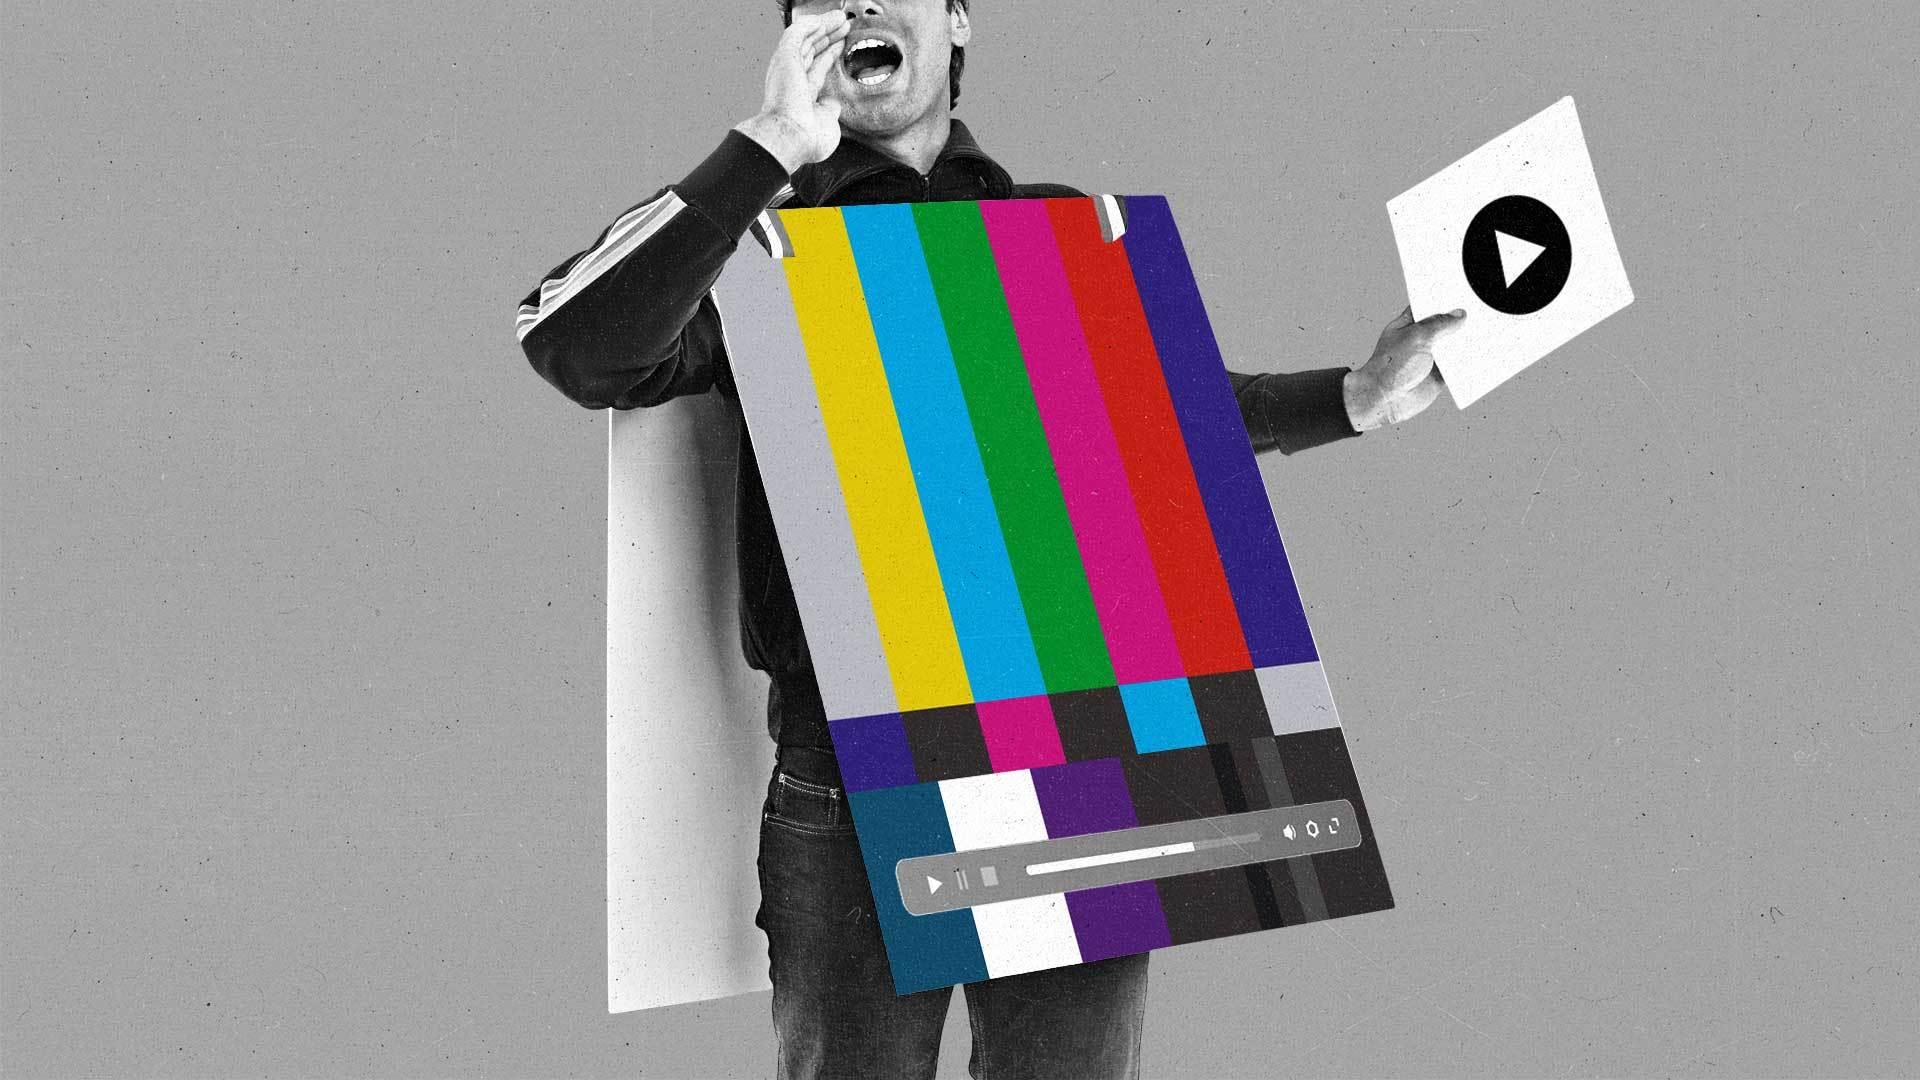 A man in a sandwich board showing a TV test pattern and streaming UI yells while holding a sheet of paper depicting a circular play button.